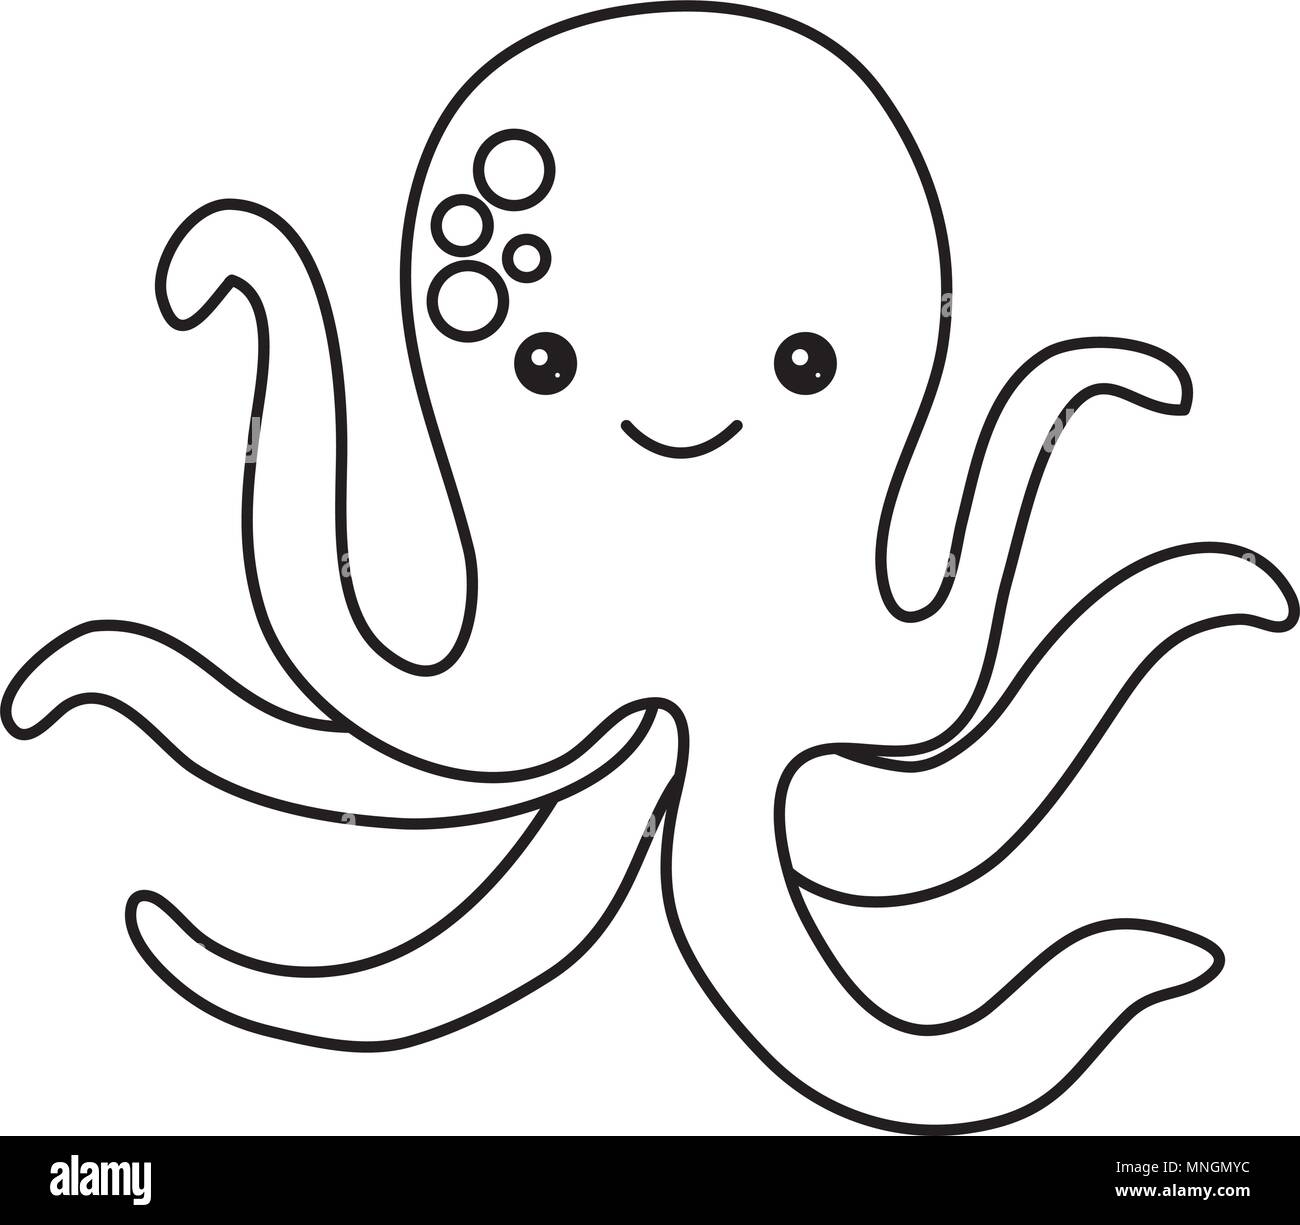 cute octopus icon over white background, vector illustration Stock ...